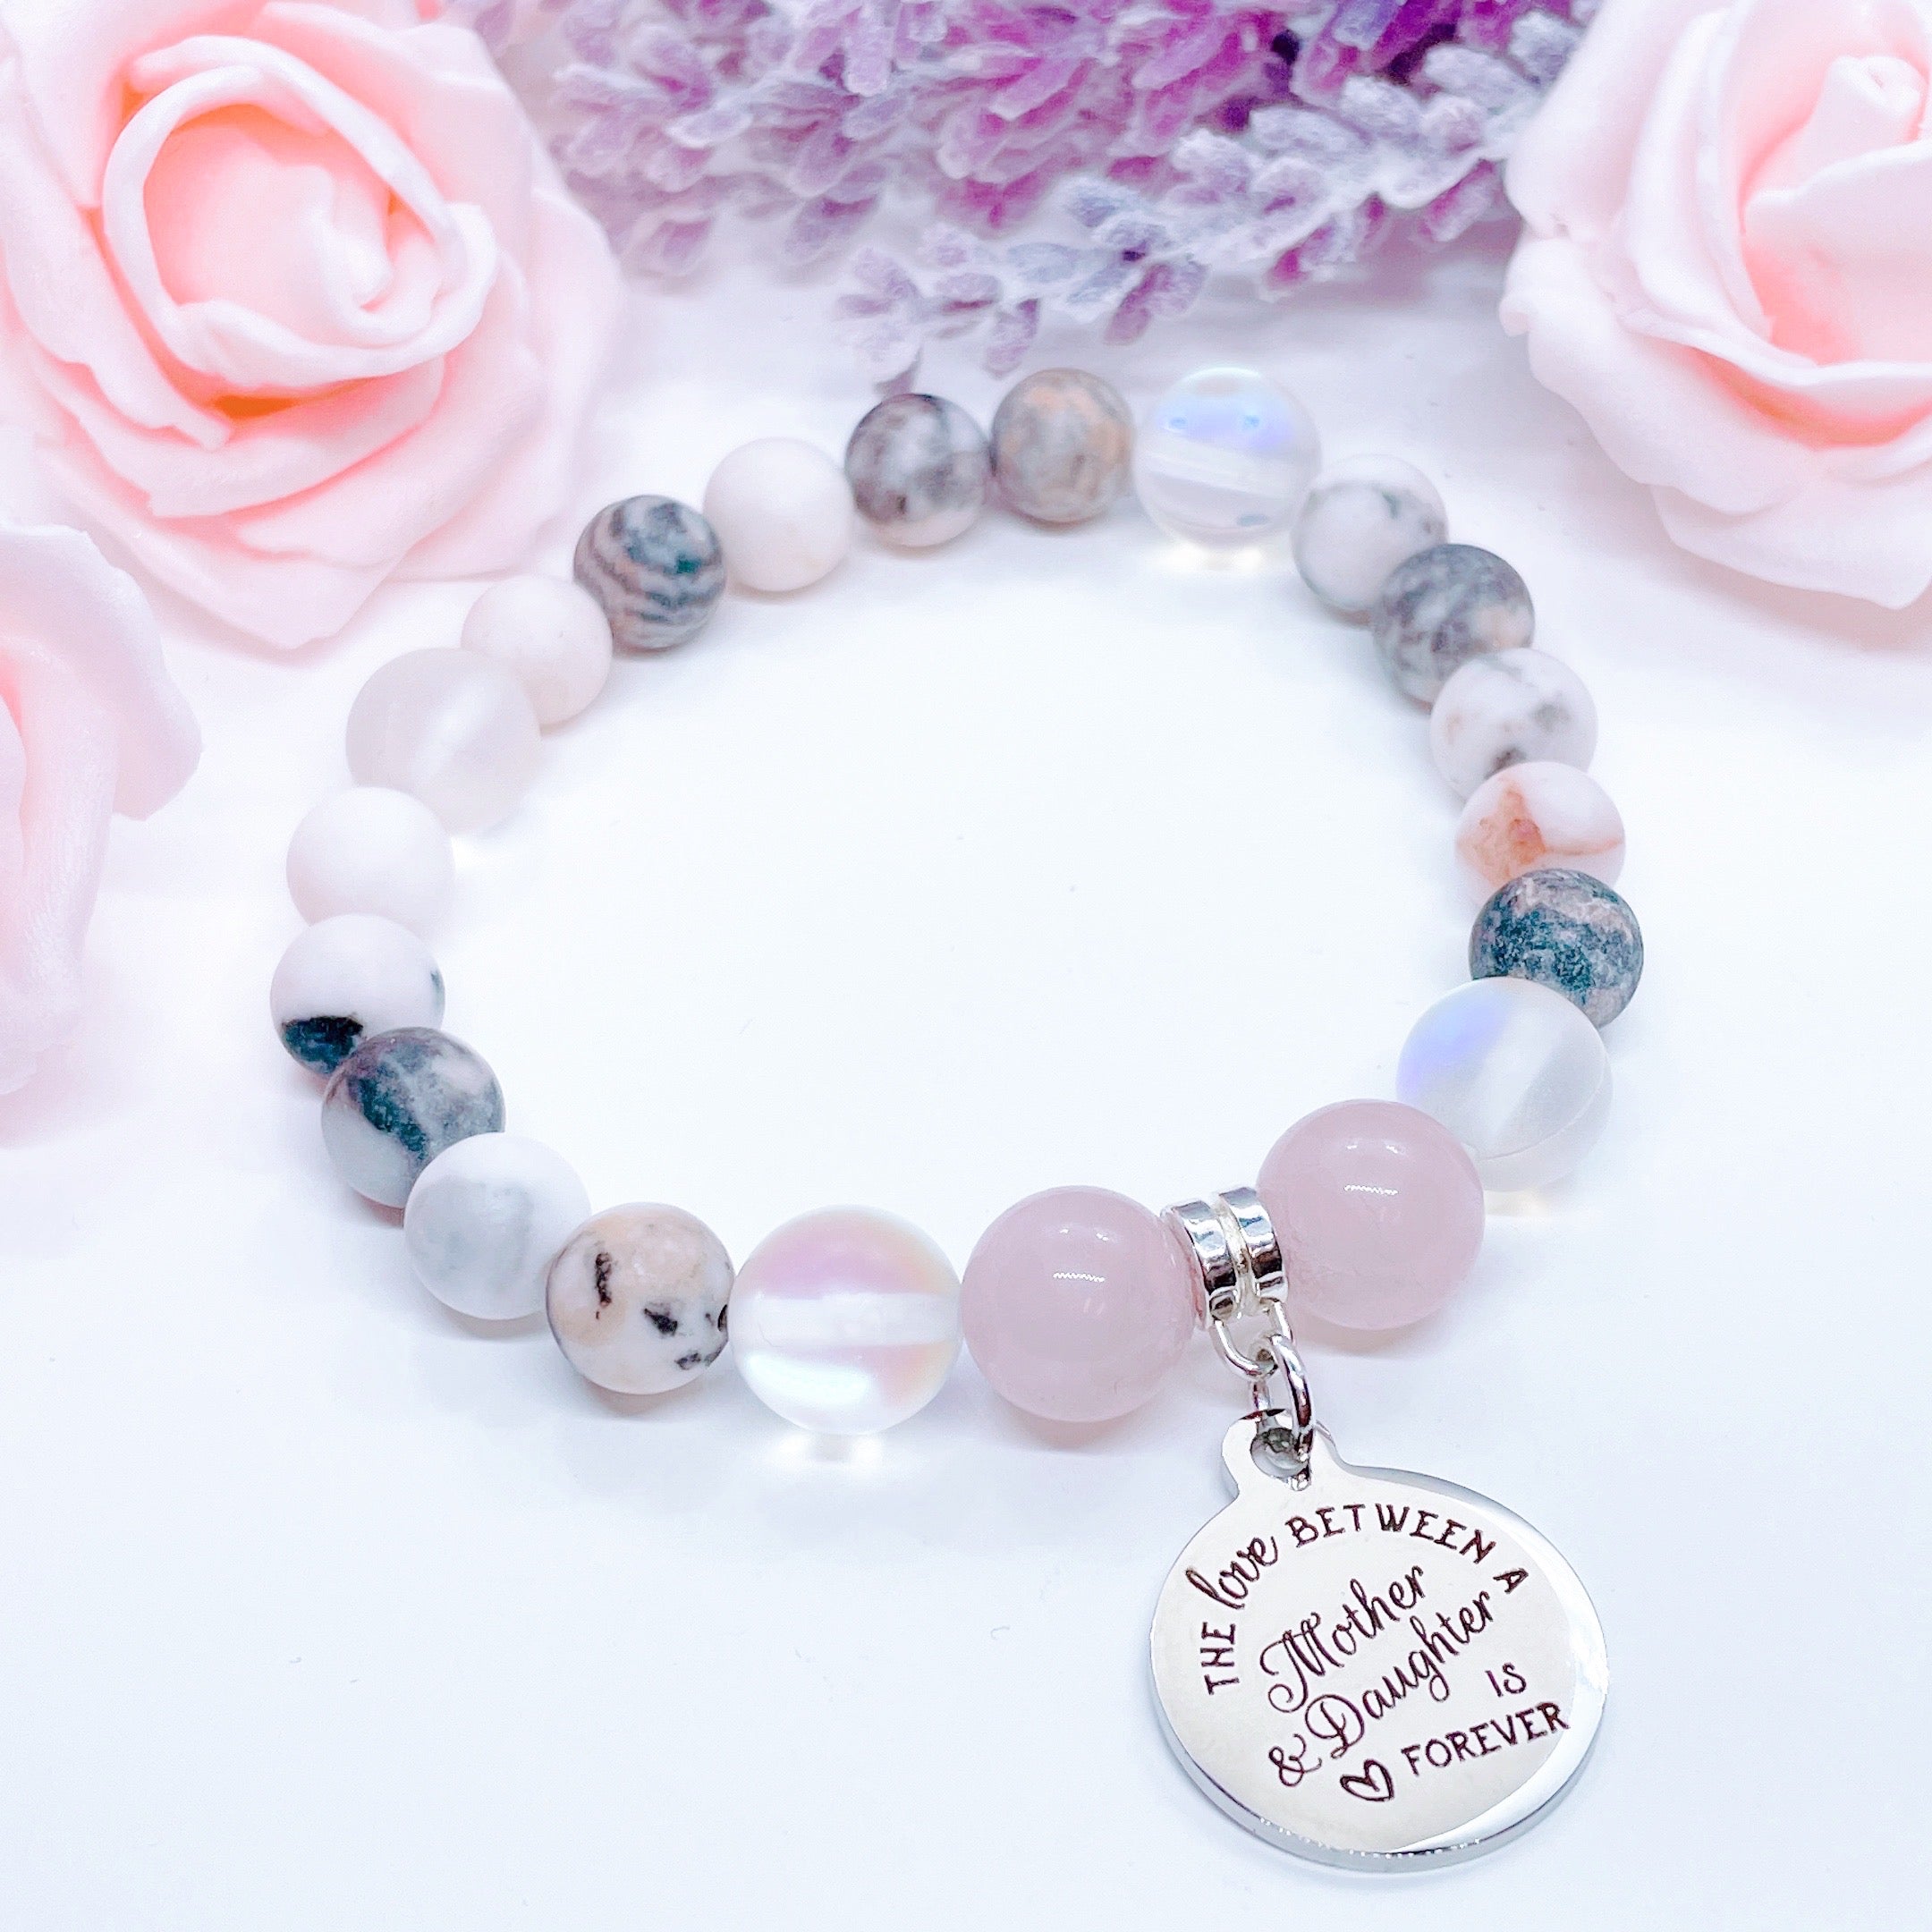 The Love Between a Mother &amp; Daughter Charm Bracelet